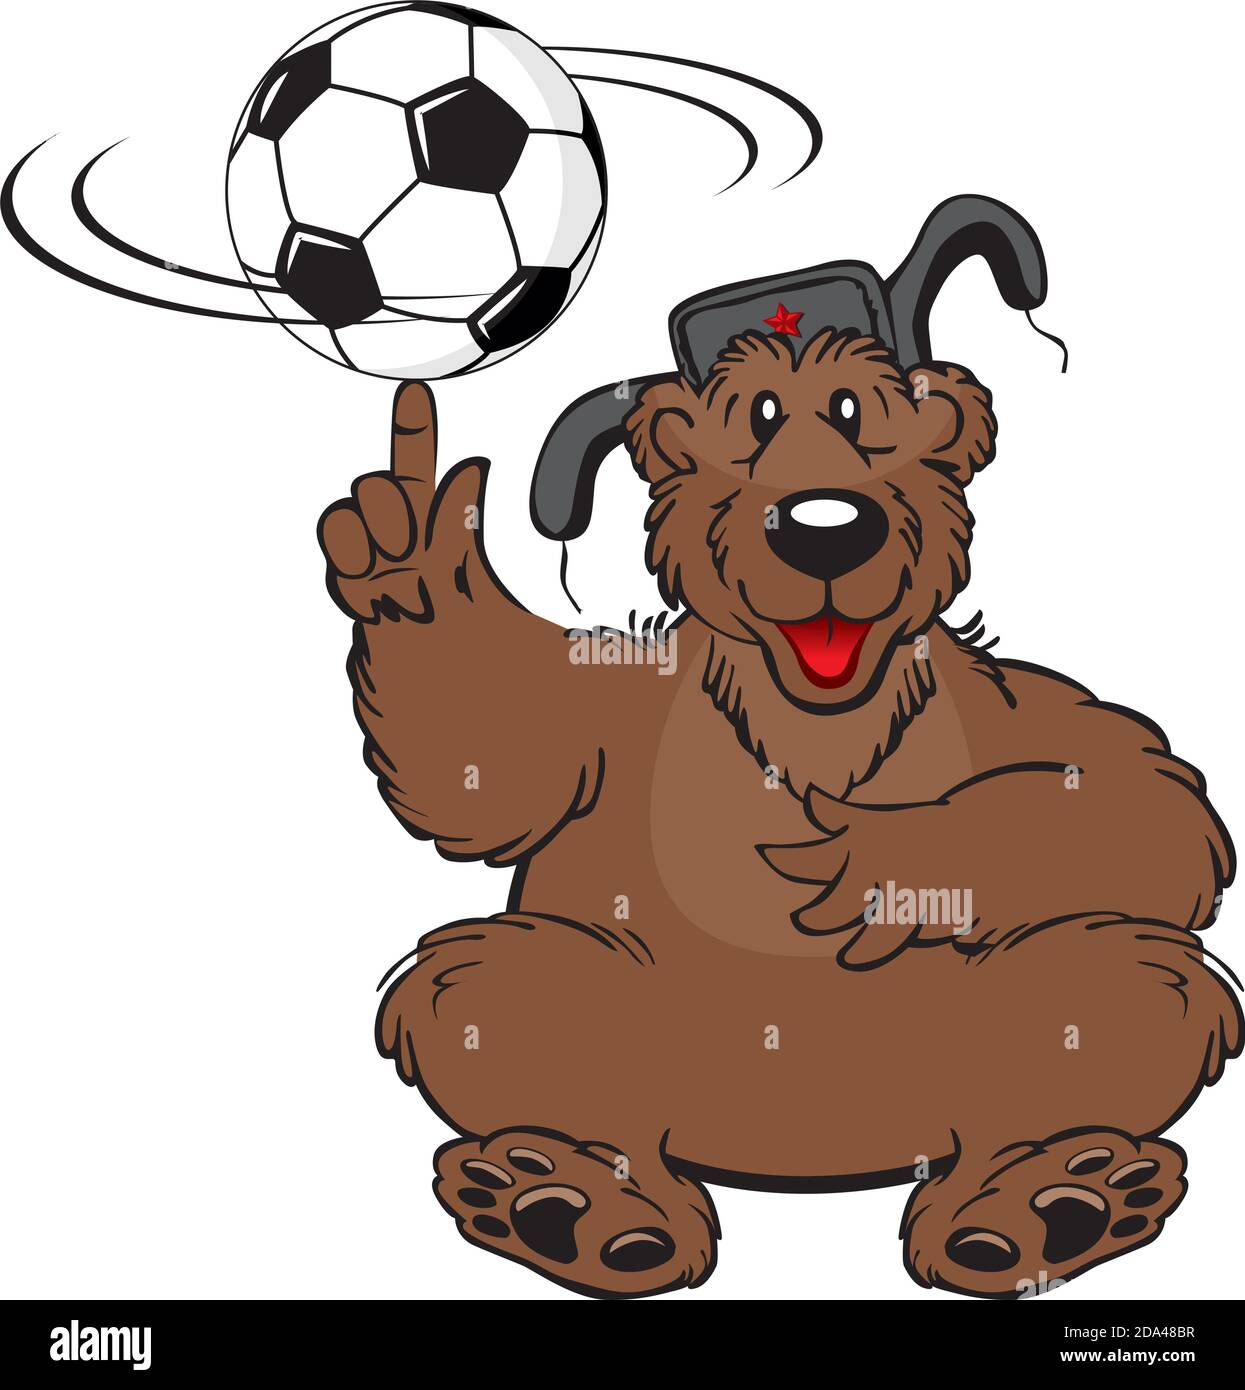 Russian bear in a cap with earflaps sitting on a football field. Stock Vector